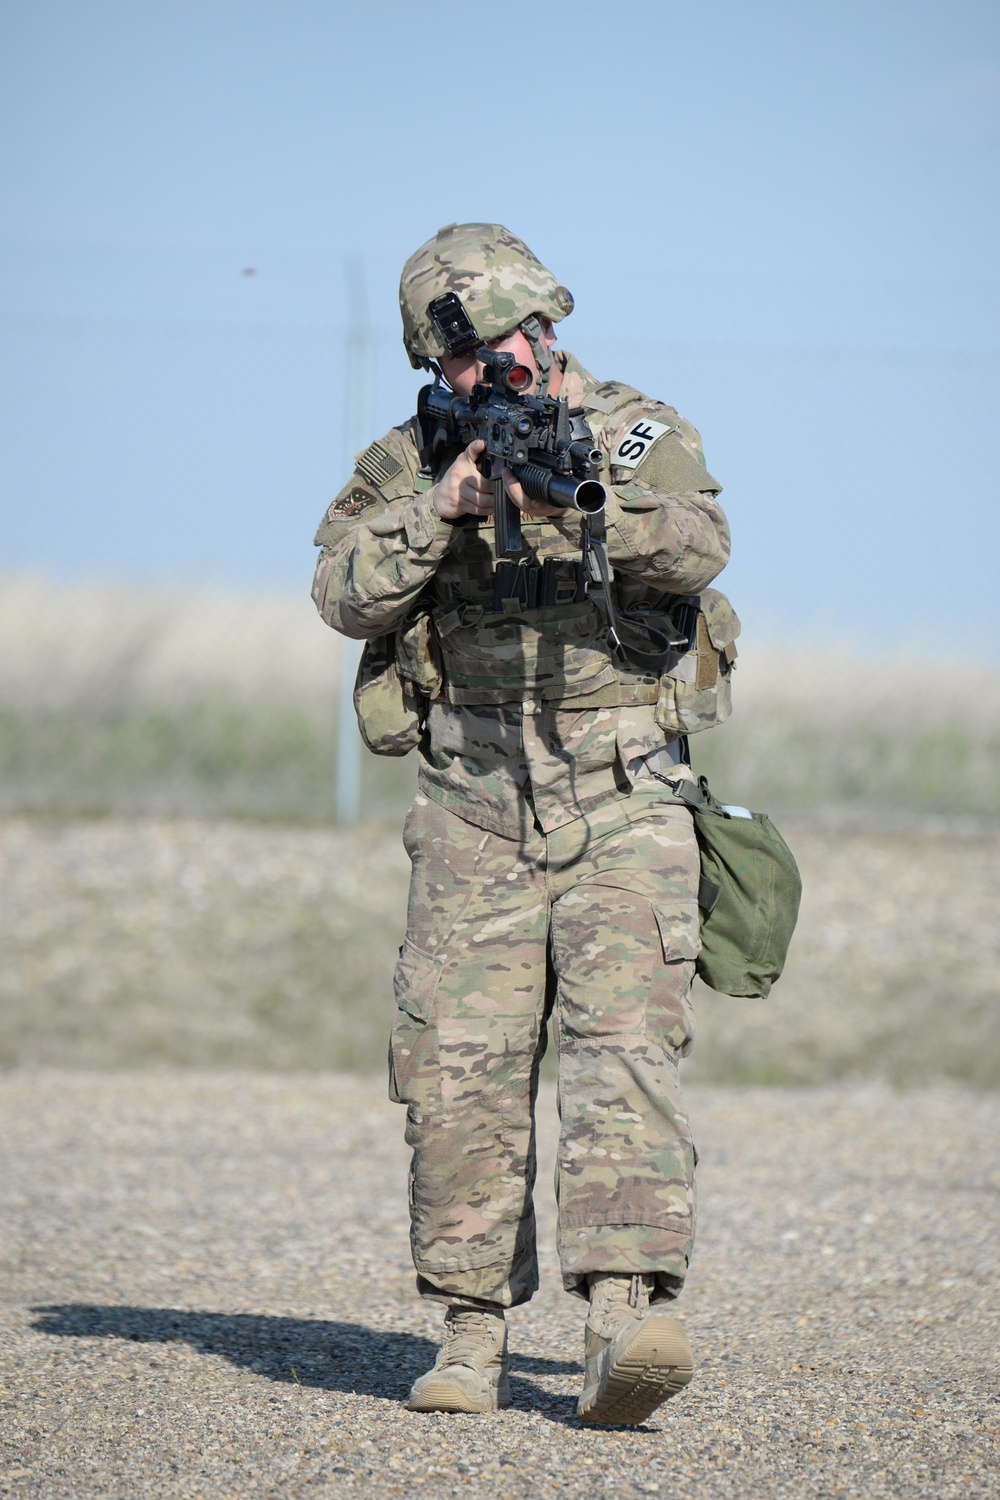 219 SFS provides missile field security during annual training period